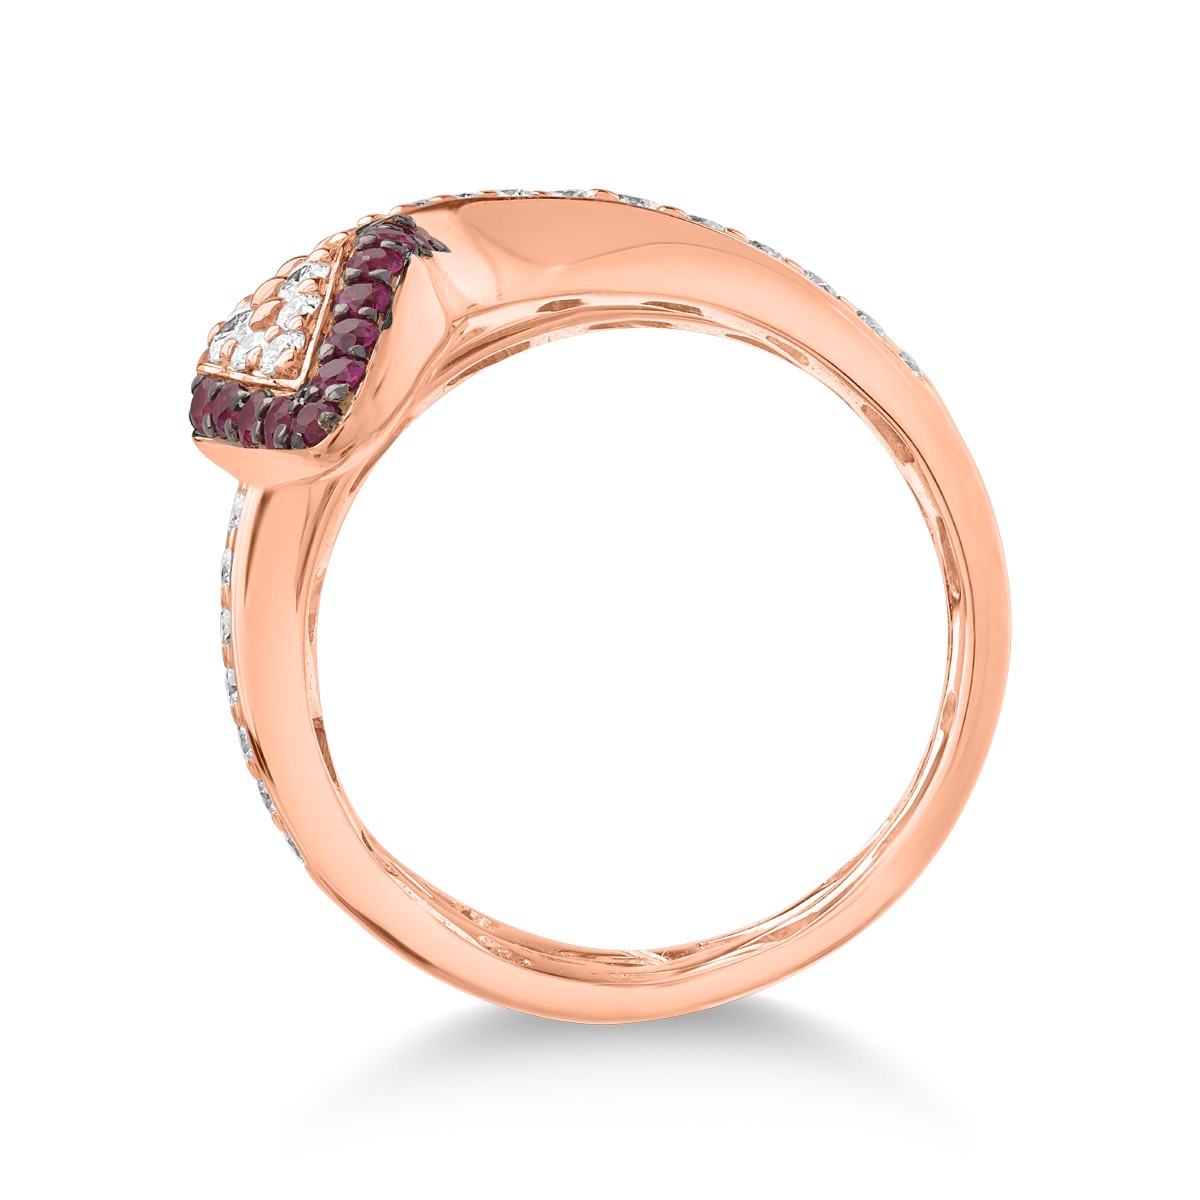 18K rose gold ring with diamonds of 0.78ct and rubies of 0.19ct